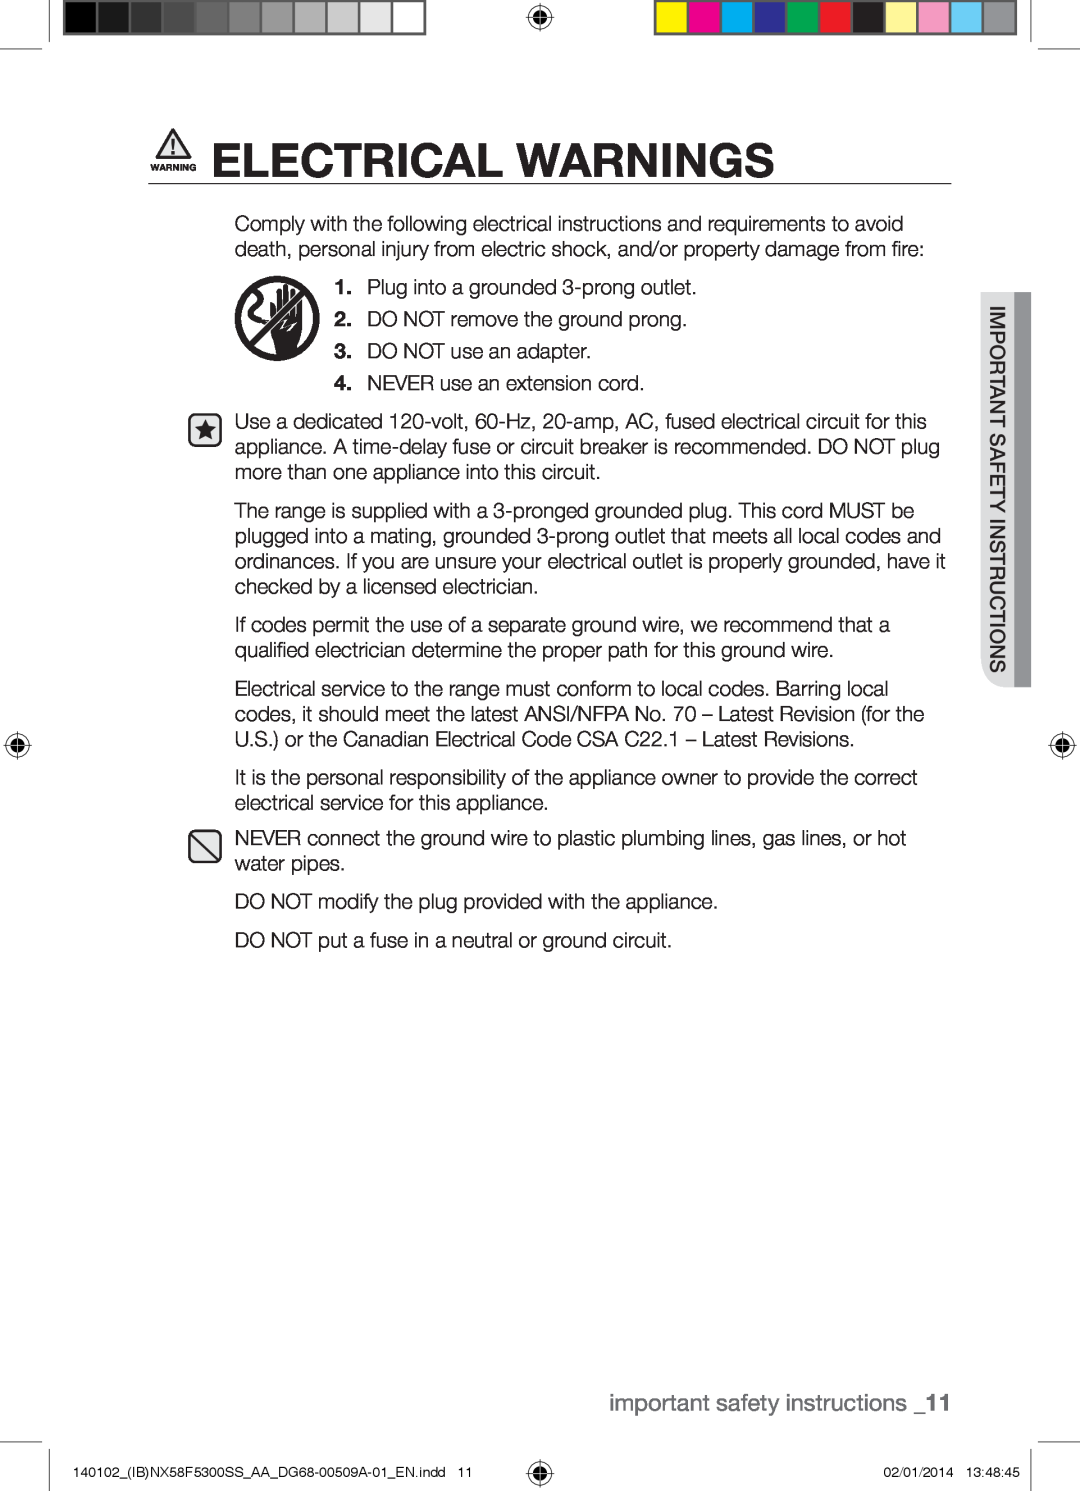 Samsung NX58F5500SW user manual Warning Electrical Warnings, important safety instructions 